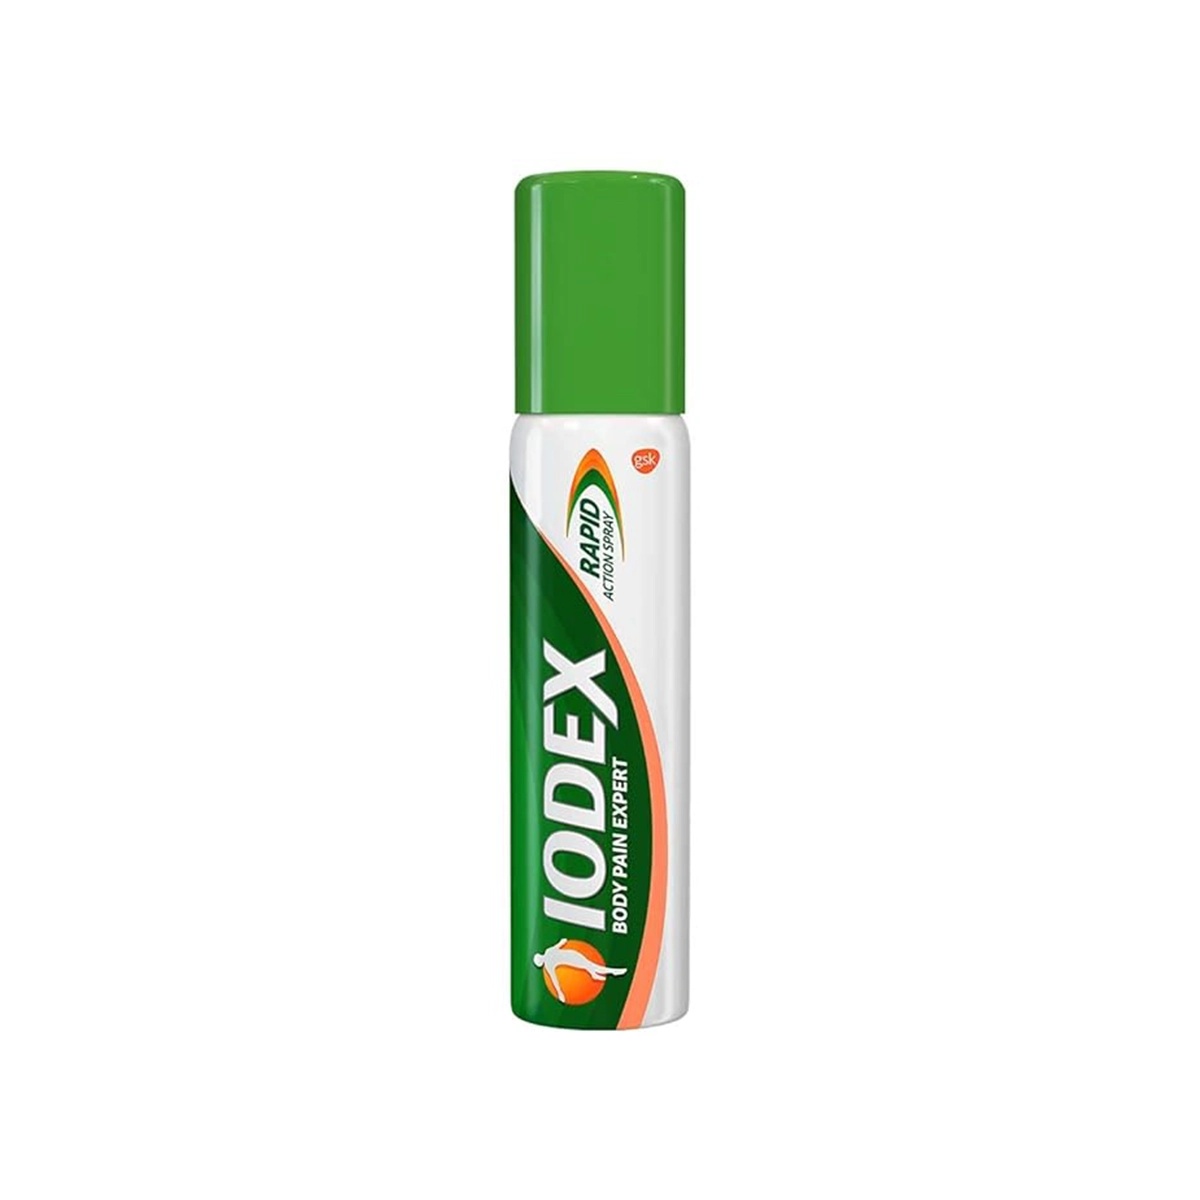 First product image of Iodex Rapid Action Spray 60g